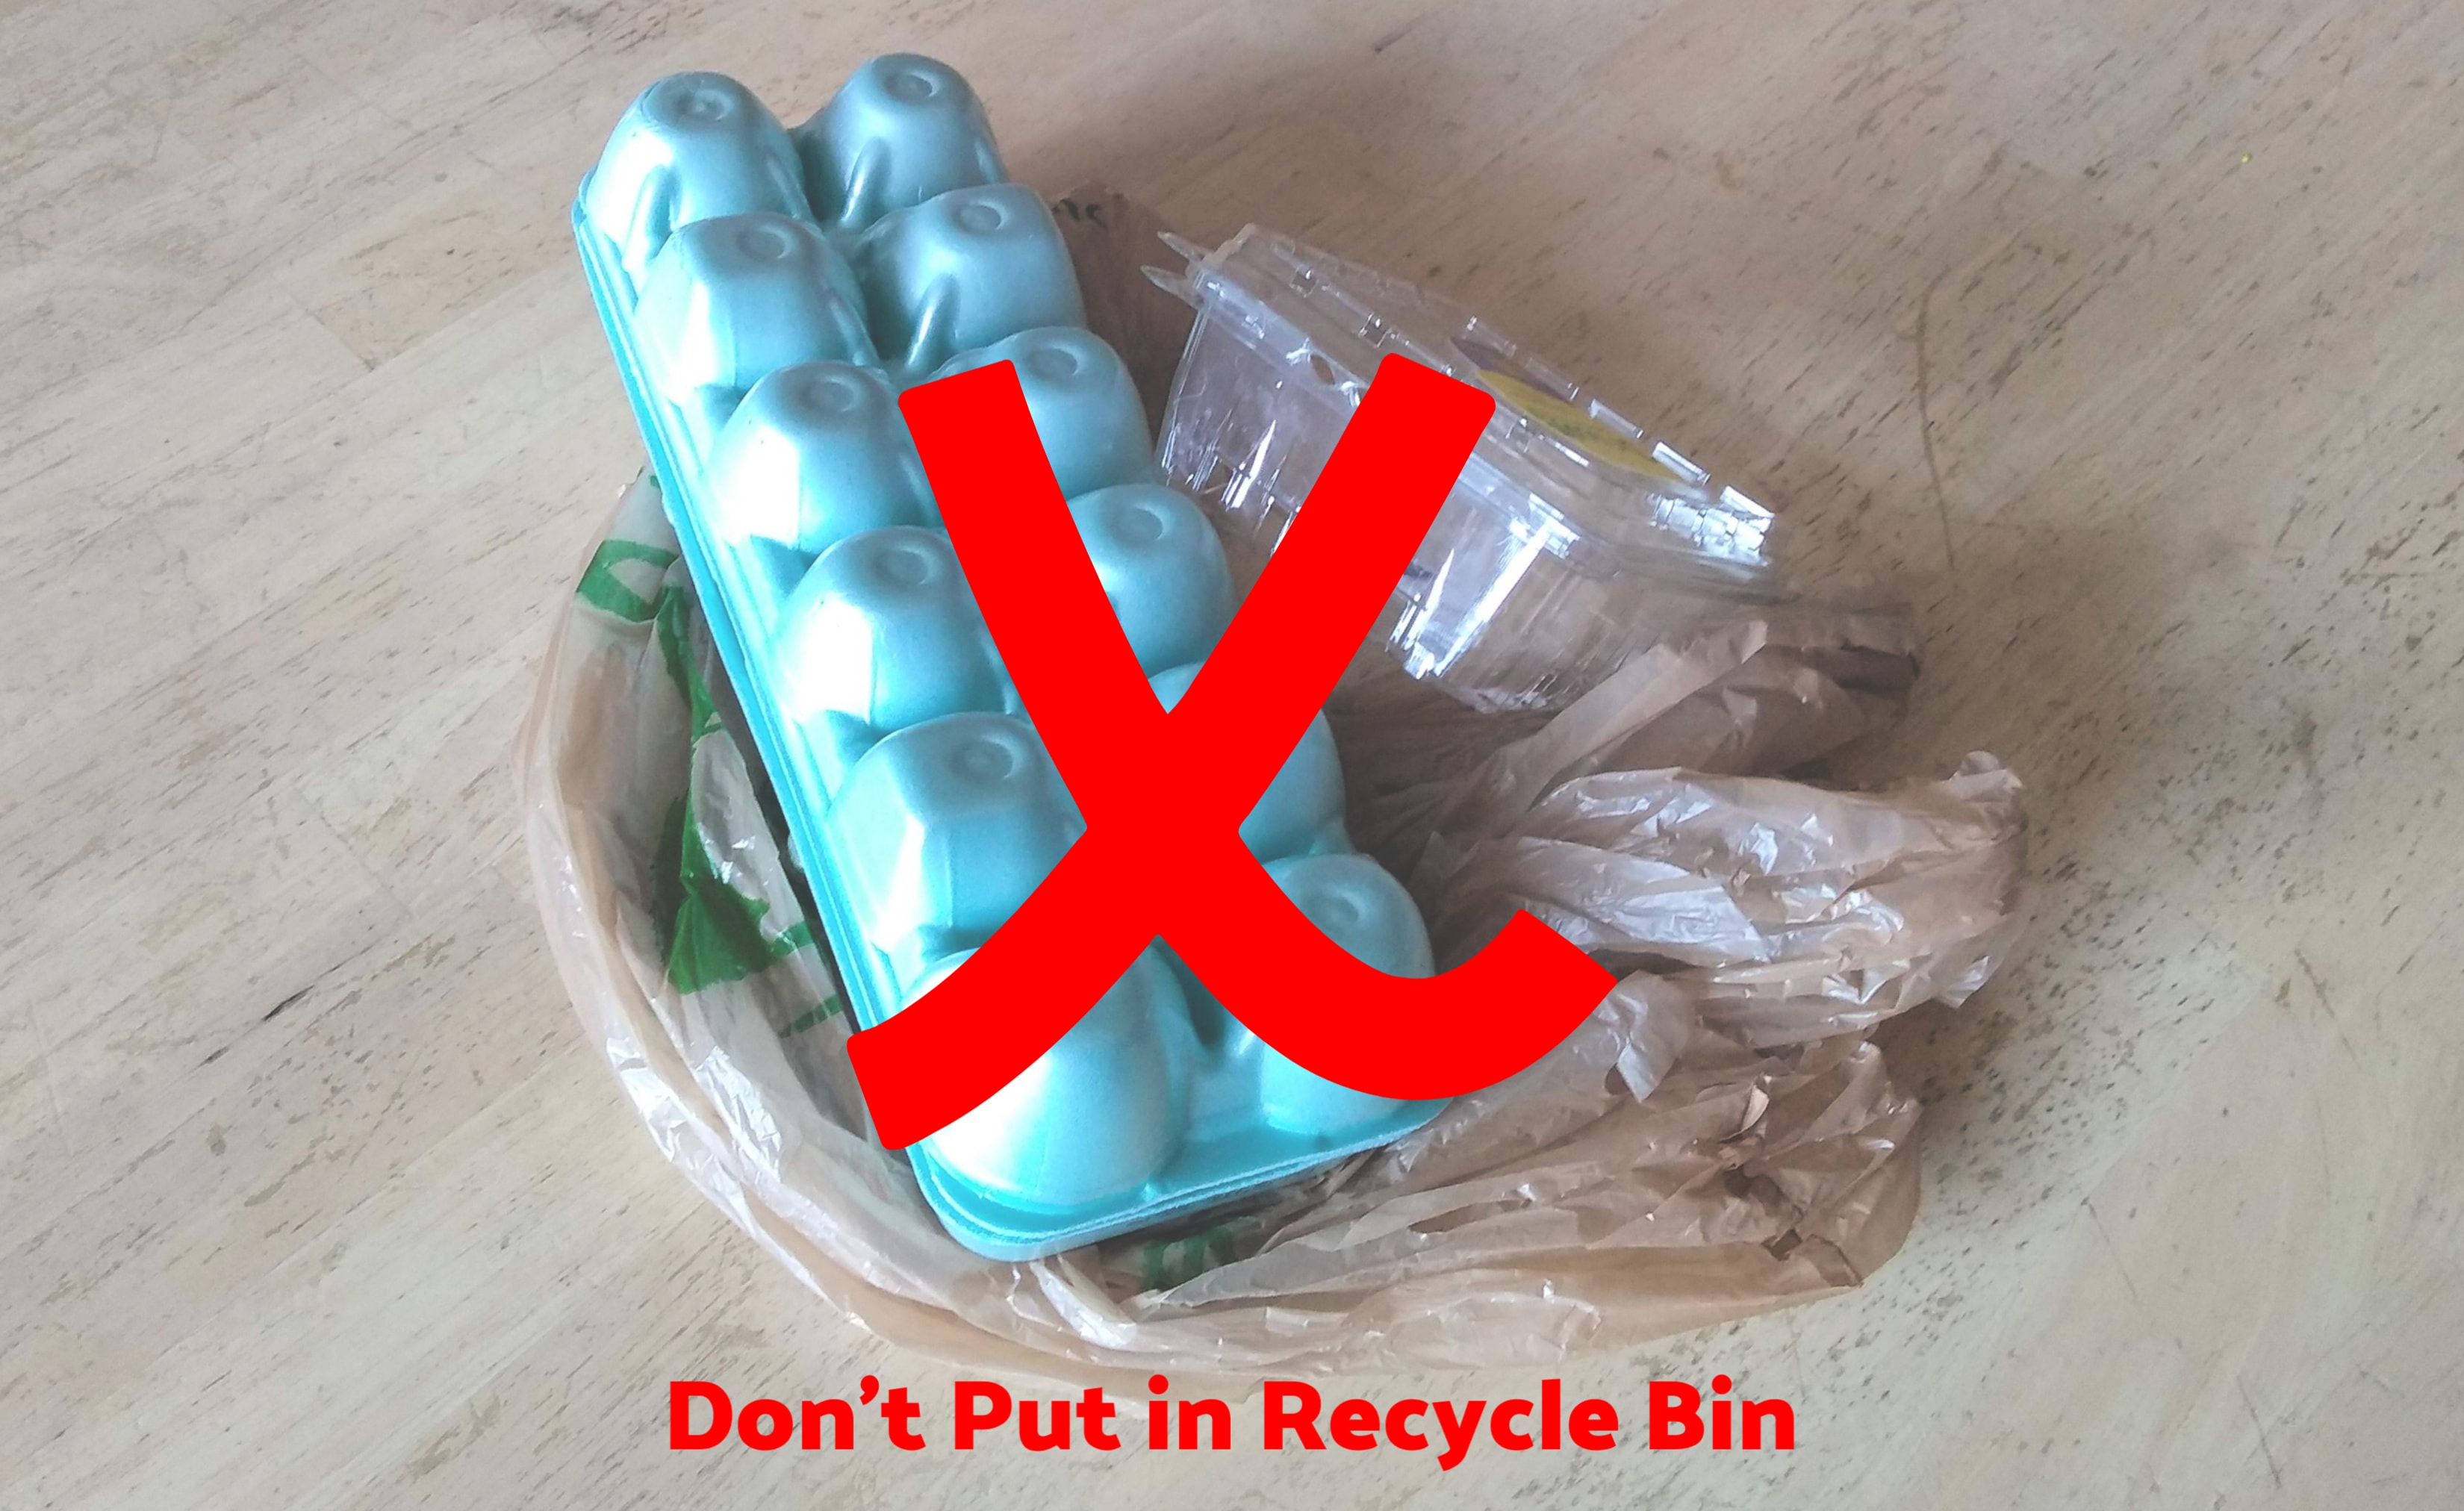 Things you should not put in your blue recycle bin - egg cartons, berry containers and plastic bags